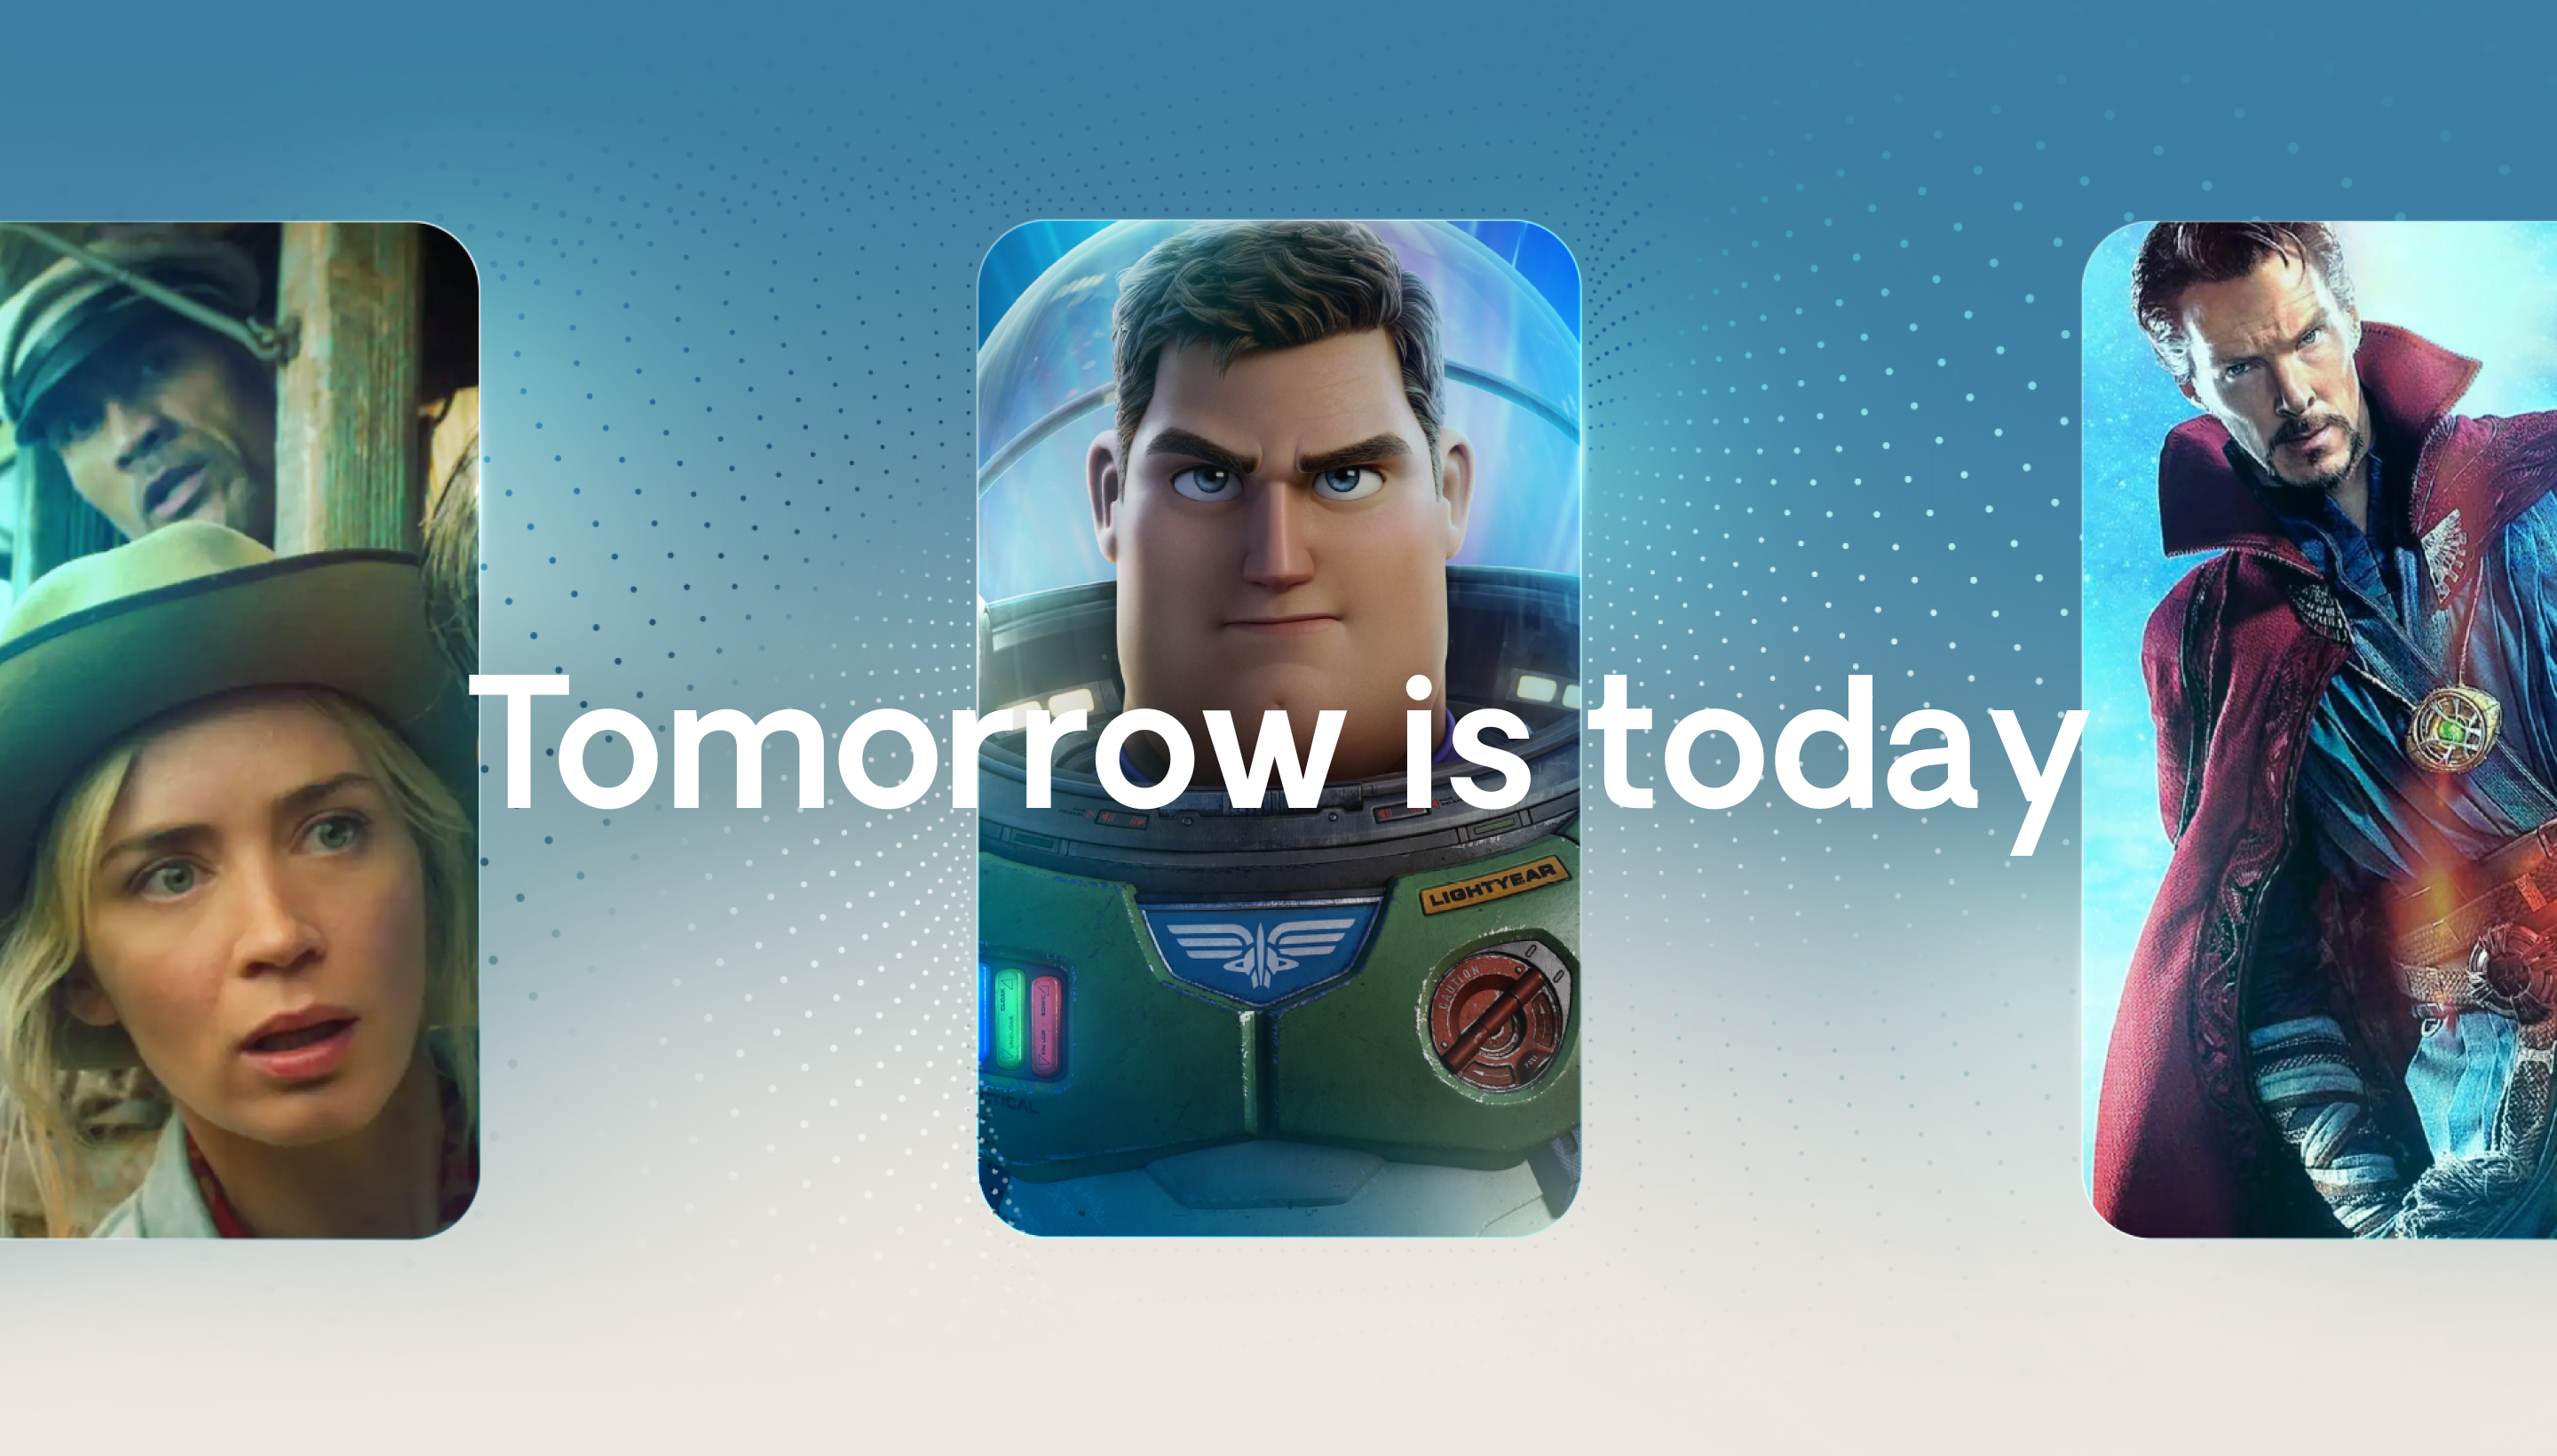 Tomorrow is today